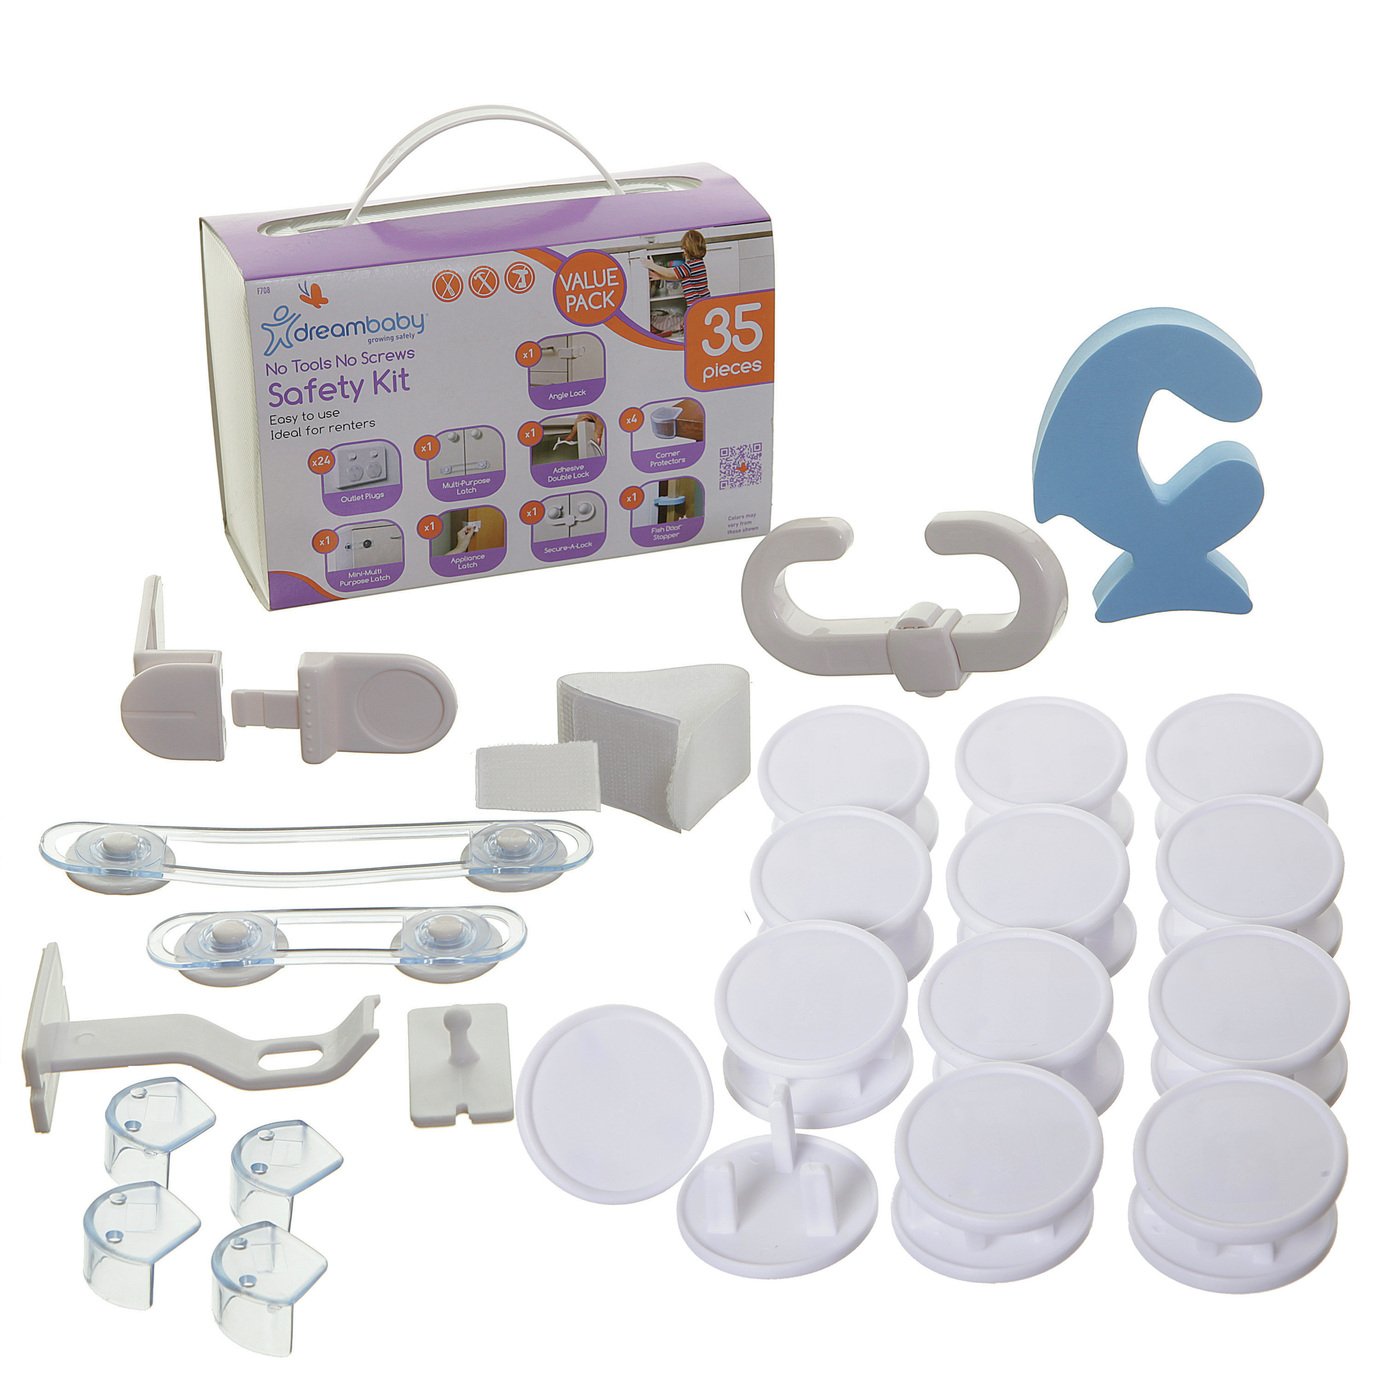 Dreambaby 'No-Tools & No-Screws' Boxed 35Pc Home Safety Kit Review